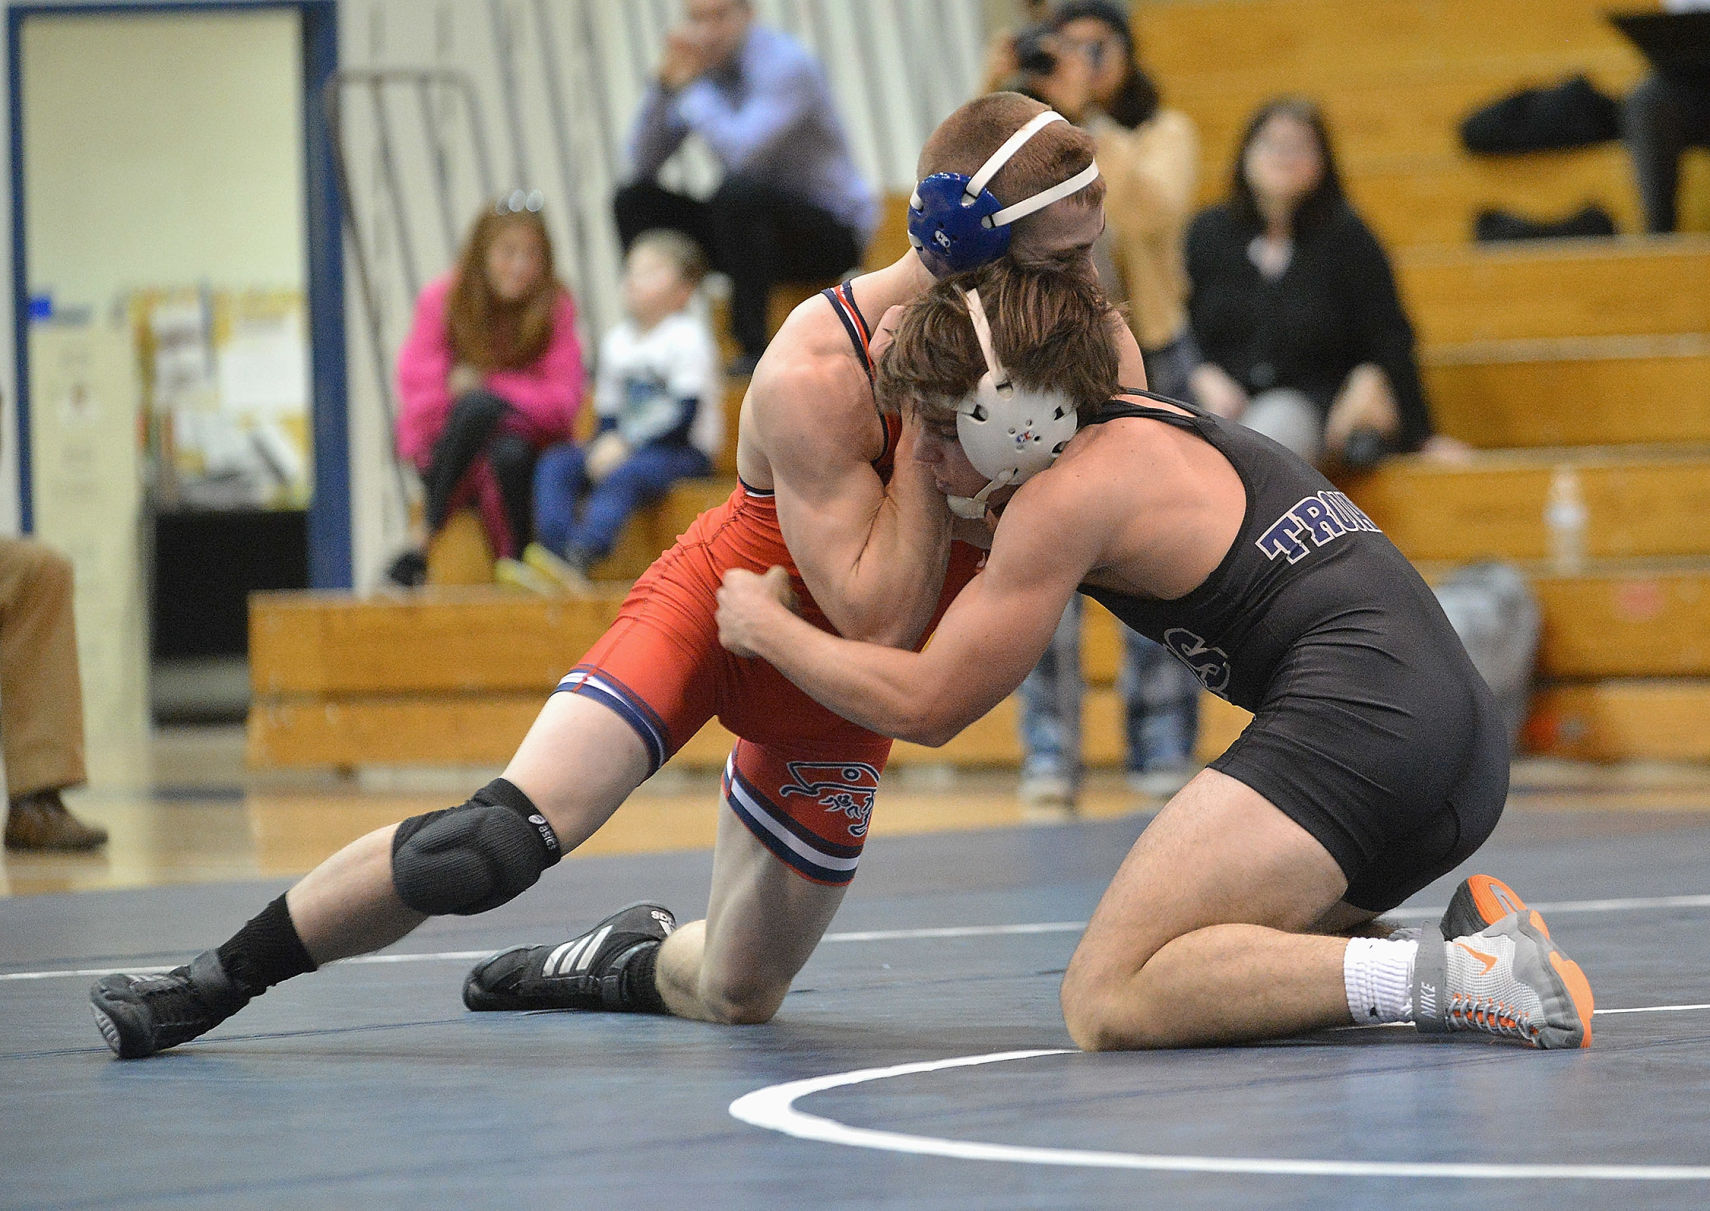 PSU Wrestling pins New England College in season opener - Plymouth